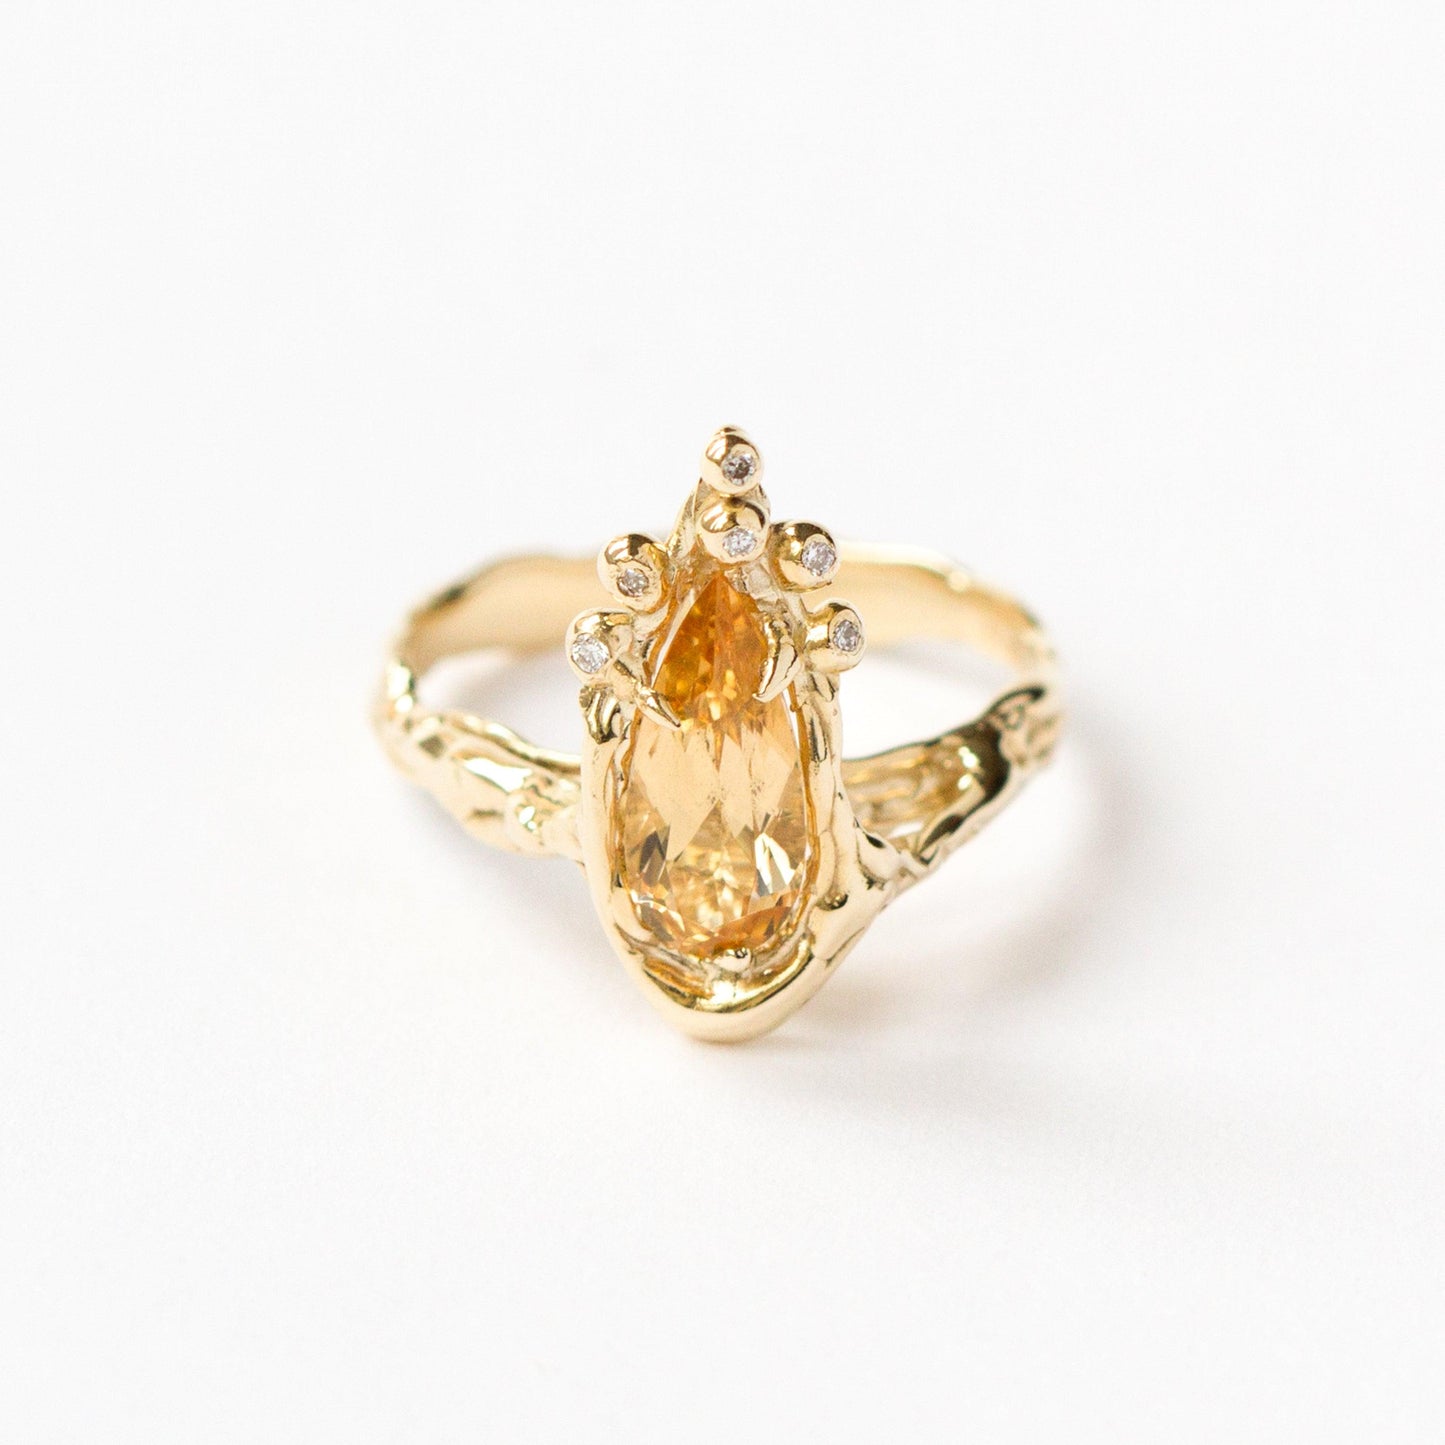 9 carat Gold ring set with citrine pear shape and white diamonds - LaParra Jewels-BESPOKE HAND MADE JEWLERY LONDON